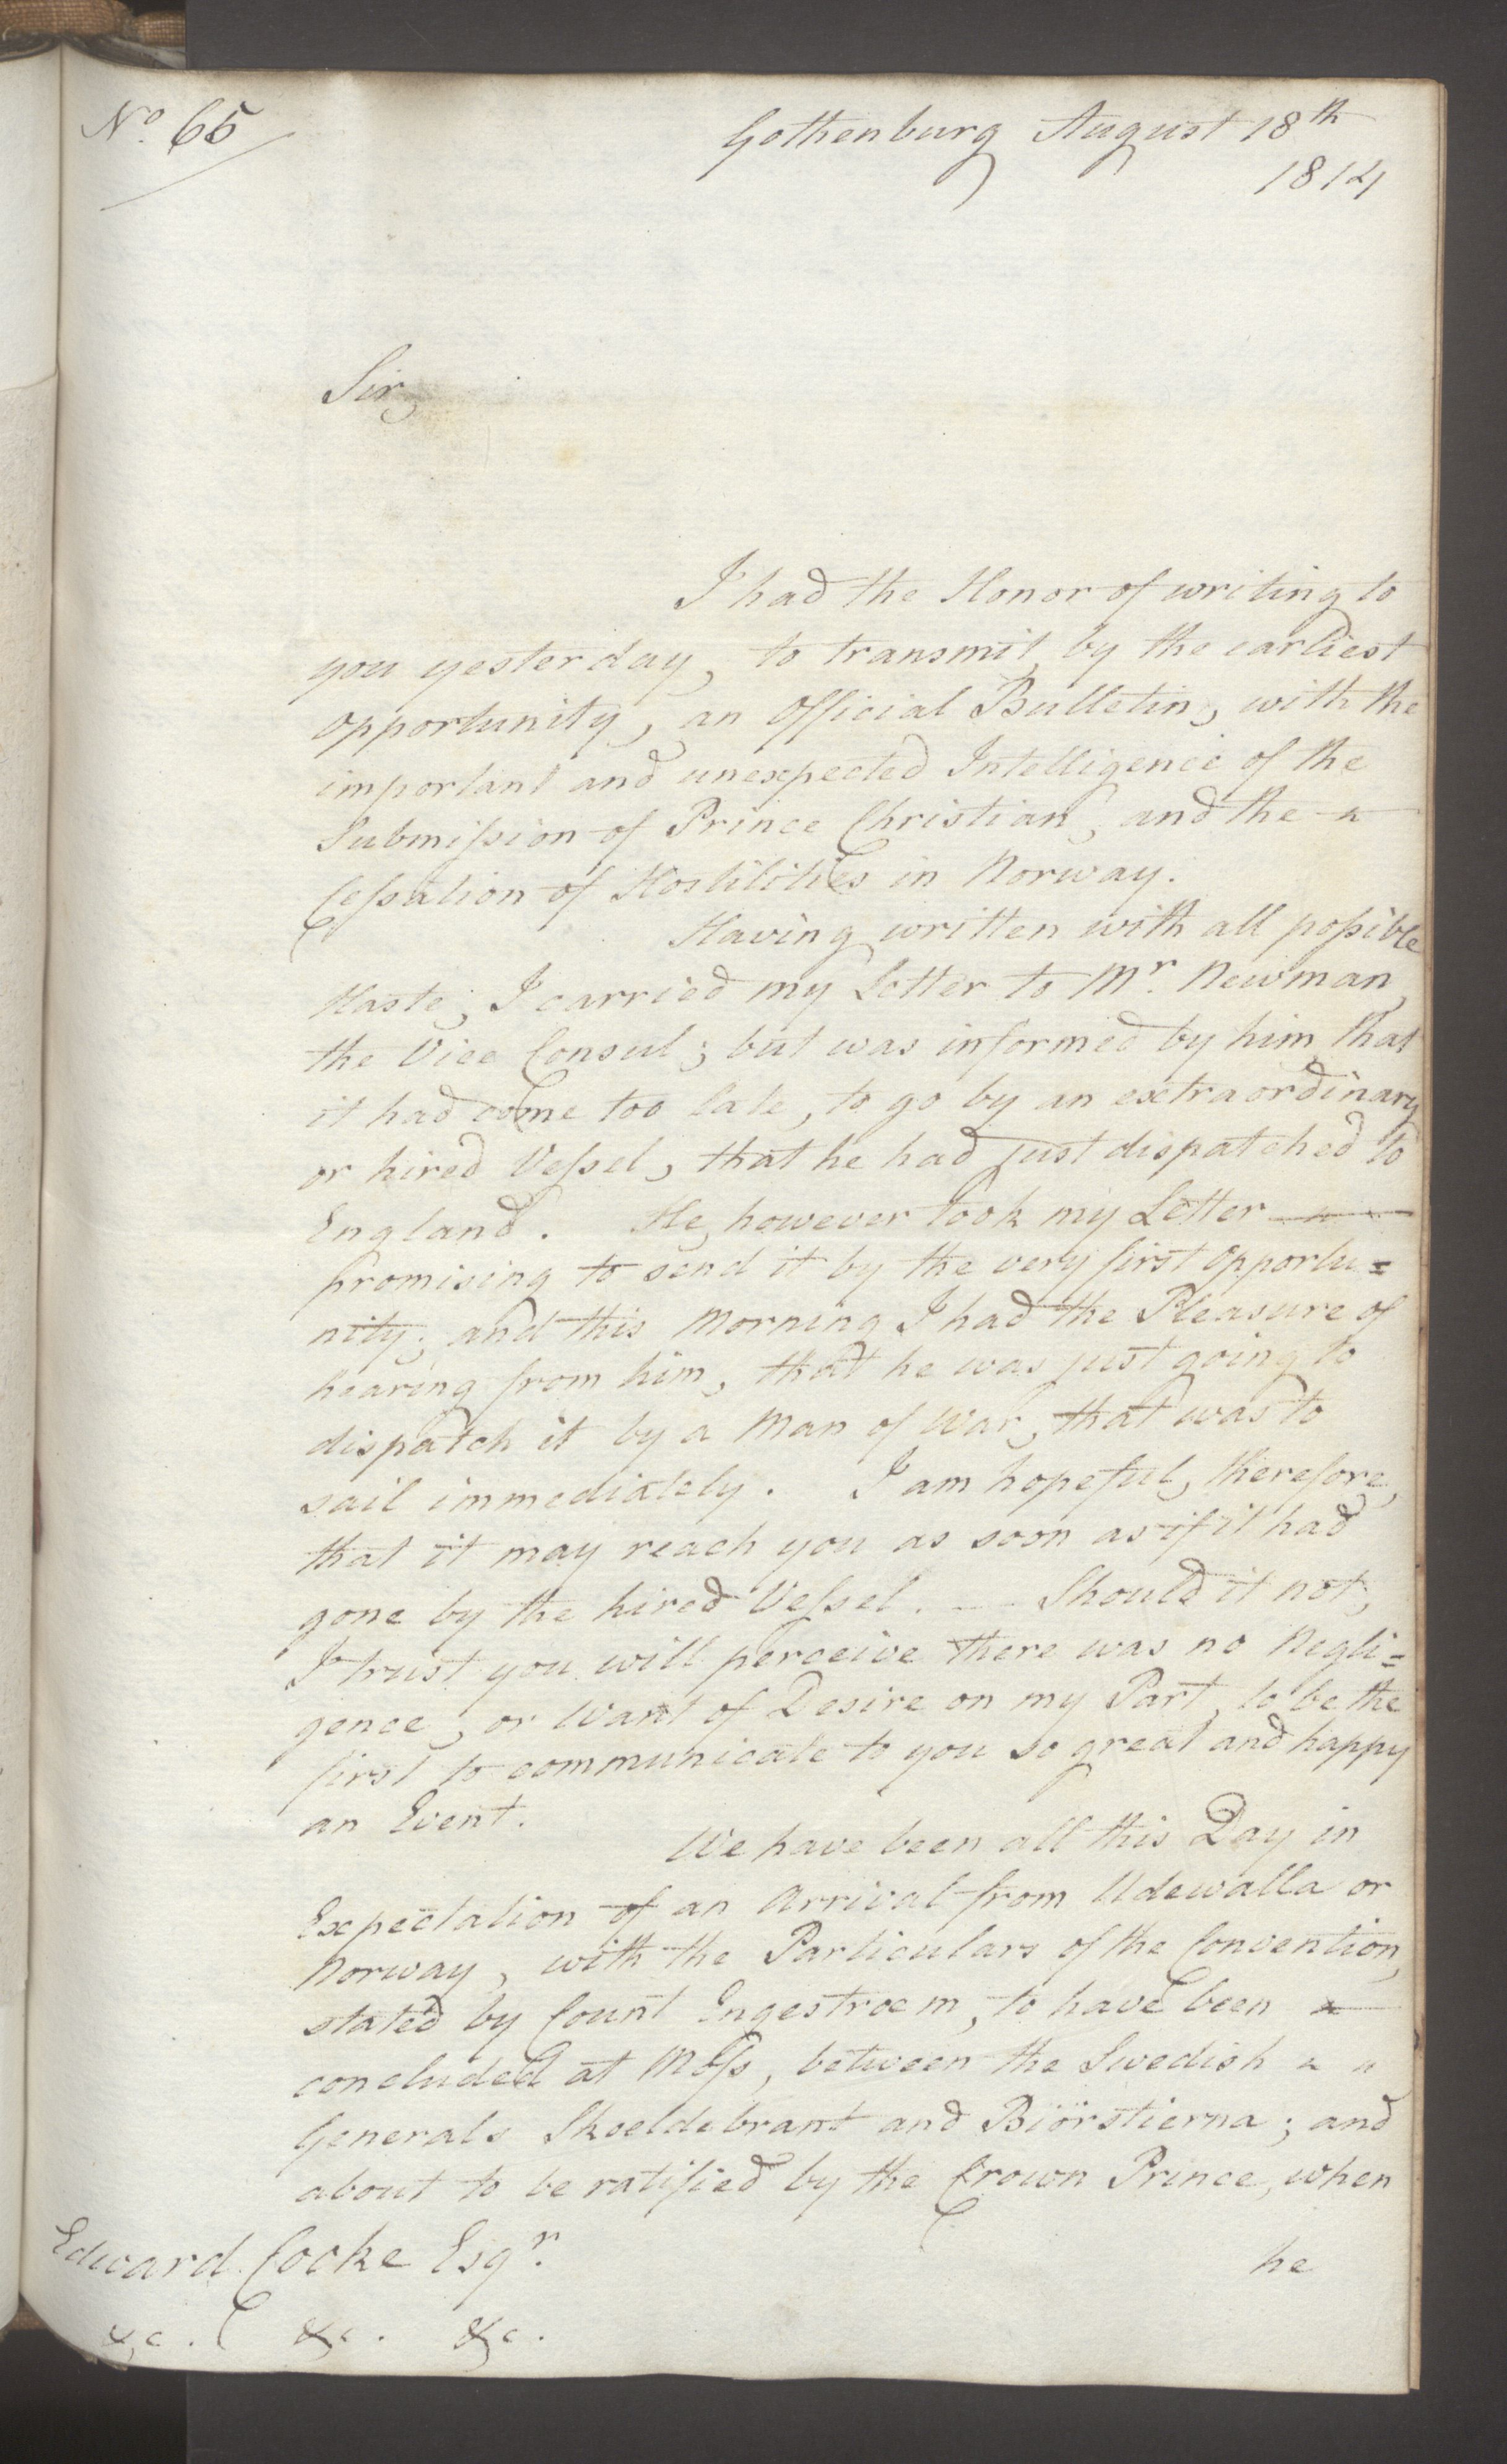 Foreign Office*, UKA/-/FO 38/16: Sir C. Gordon. Reports from Malmö, Jonkoping, and Helsingborg, 1814, p. 91